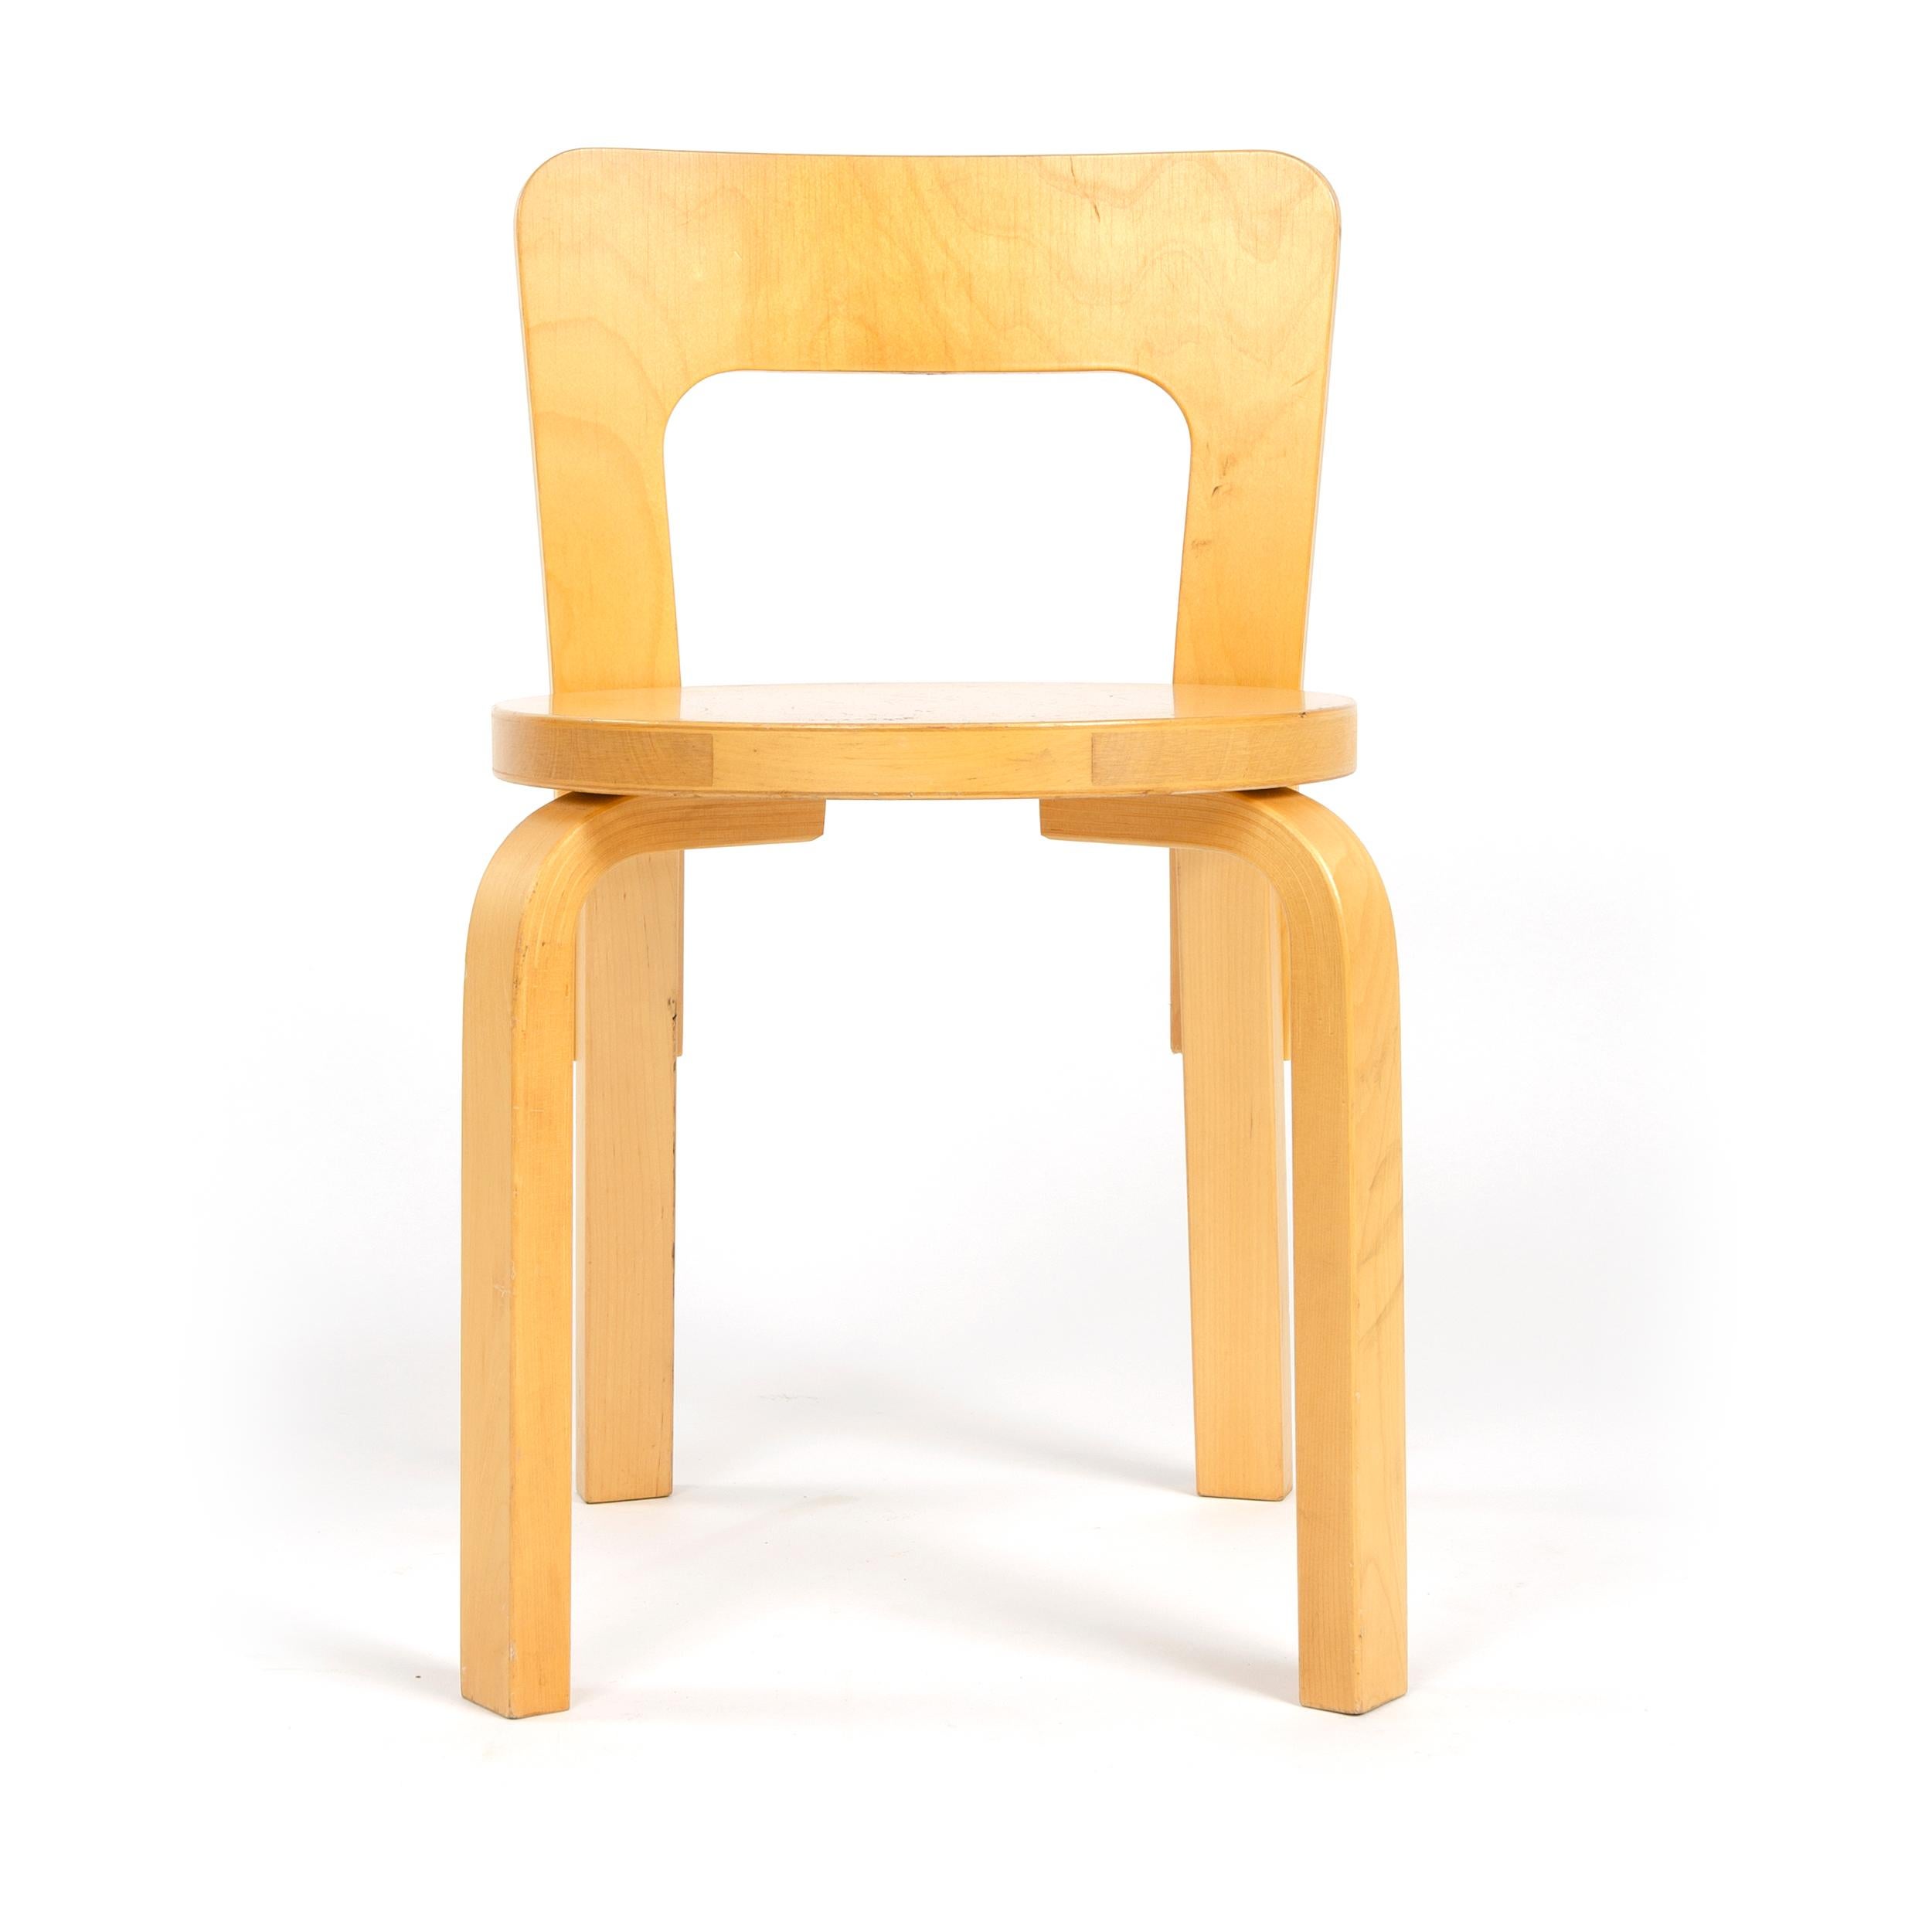 A post WWII edition of a 1935 Aalto design, model No.66, of molded and bent laminated Baltic birch. This particular higher back side chair being a ‘rounded front’ version with exposed wood seat. Legs have the Aalto inset splines at the bend of the